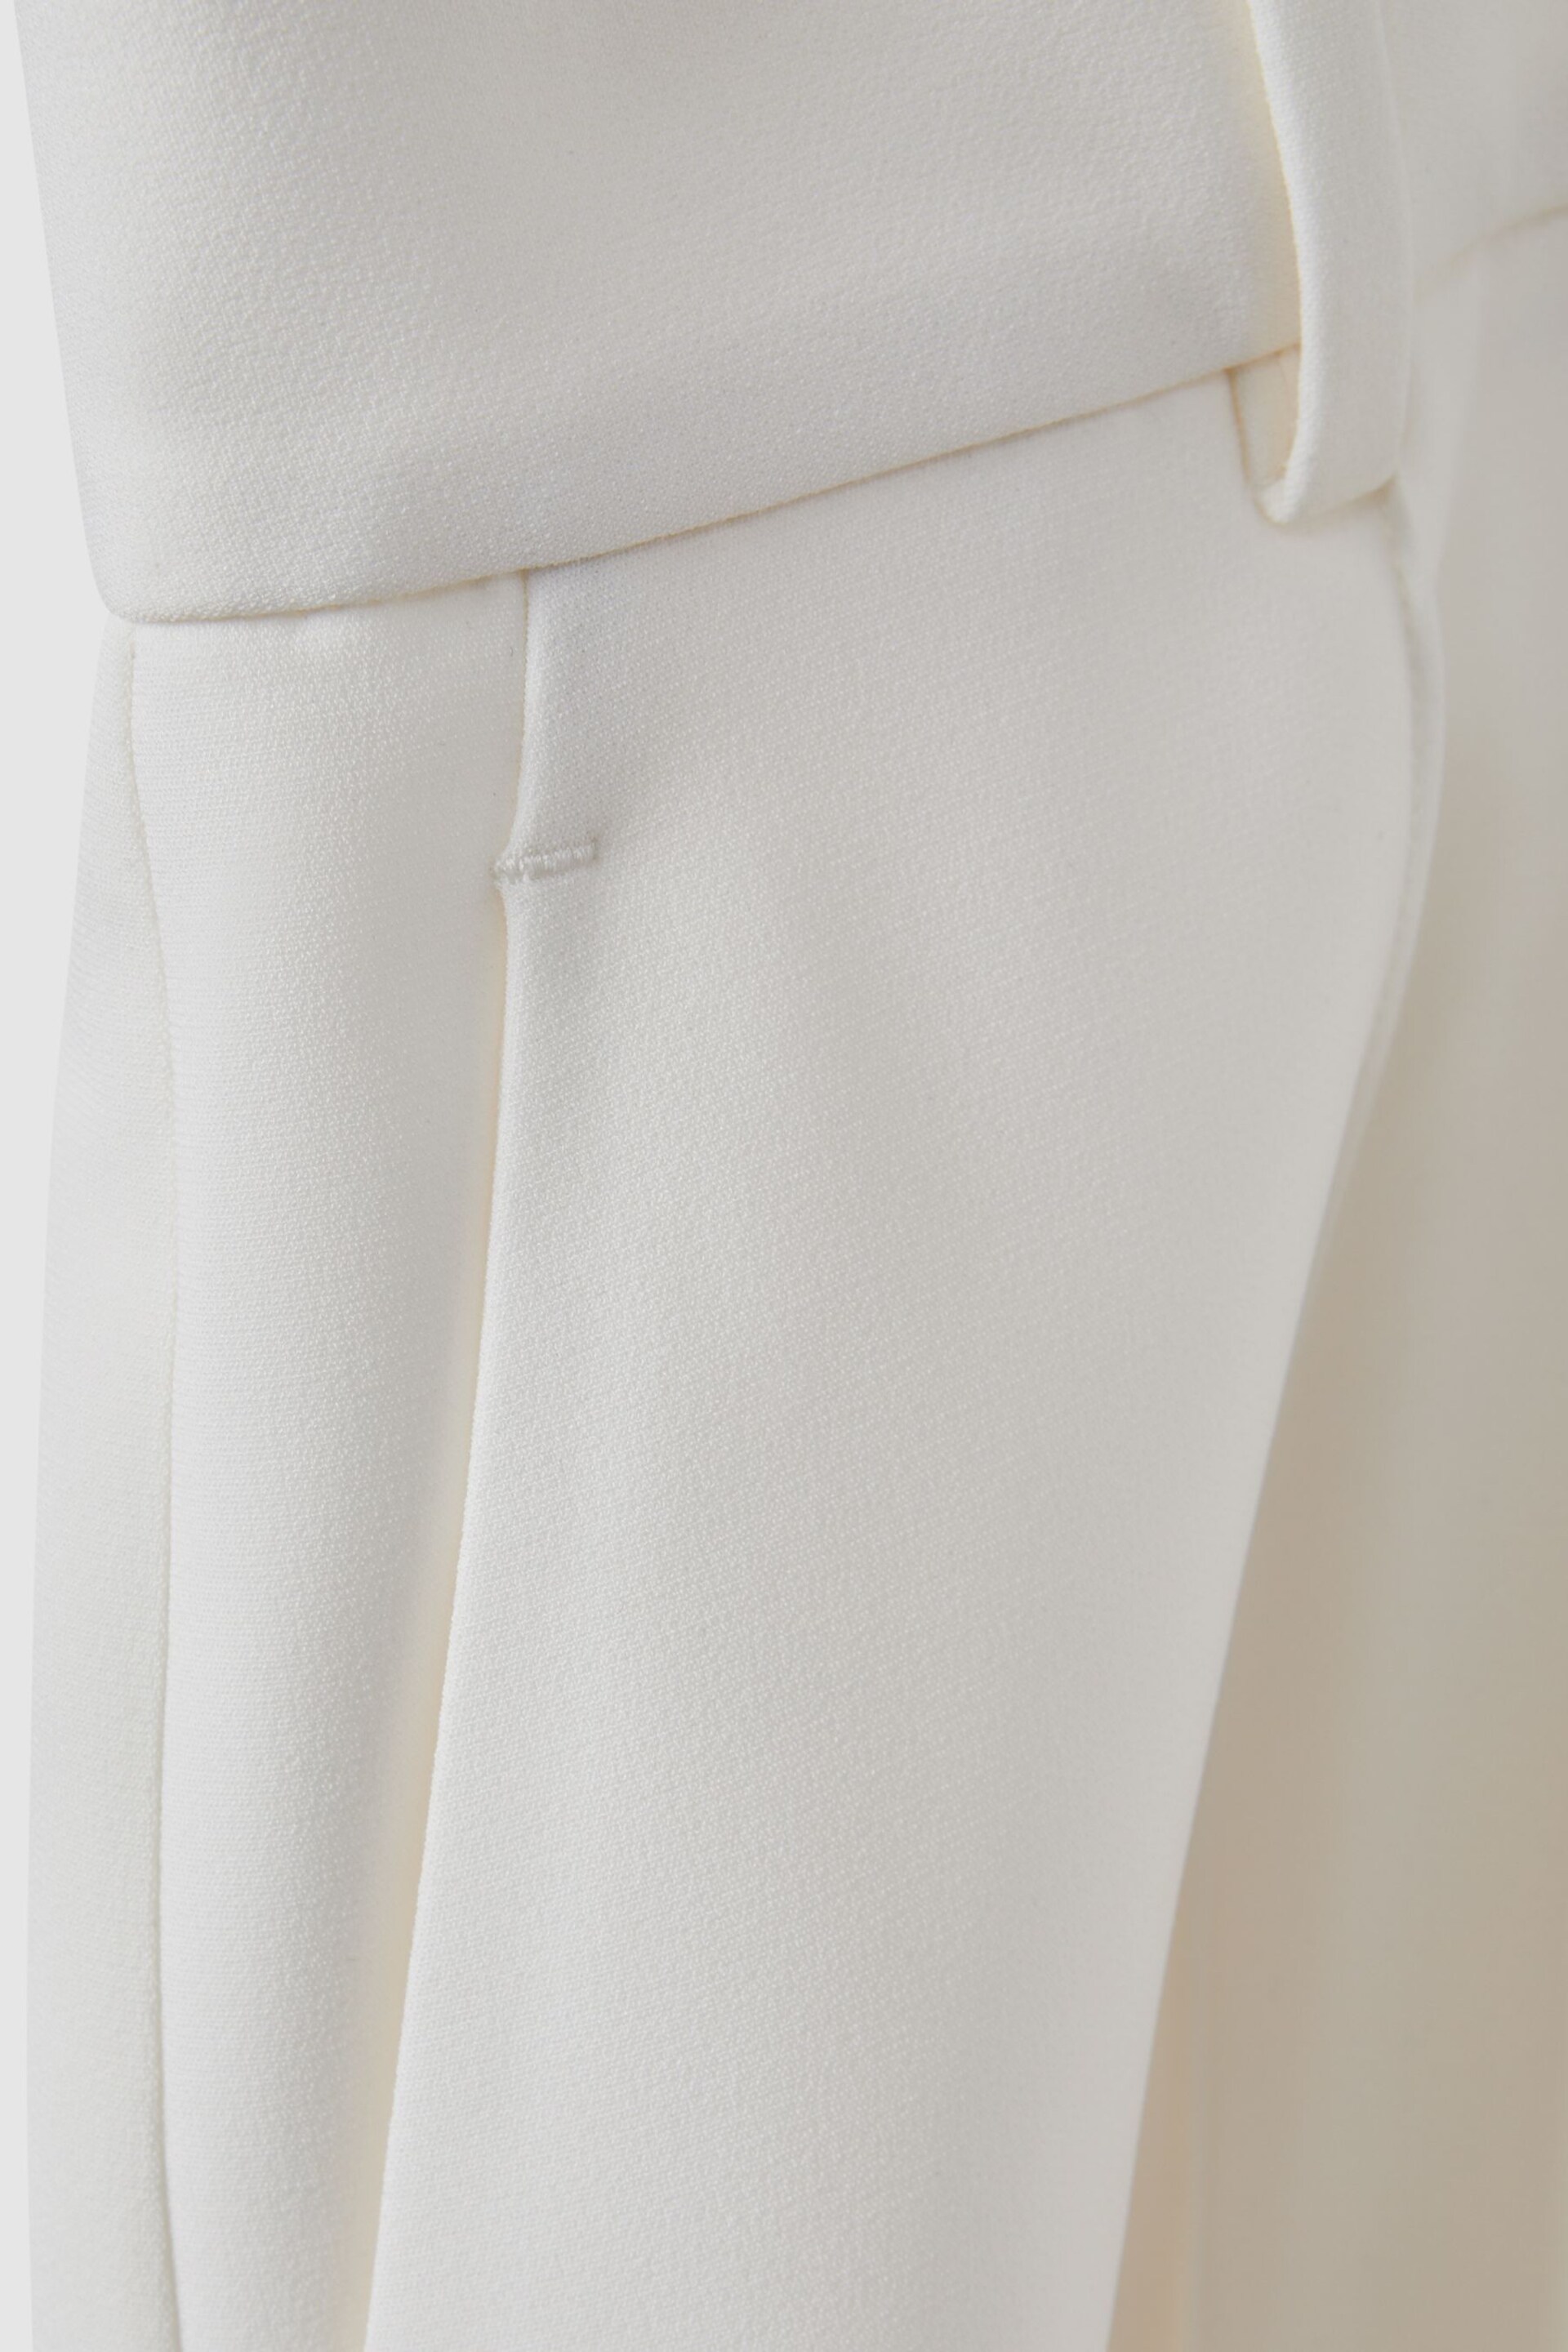 Reiss White Sienna Crepe Tailored Shorts - Image 6 of 6